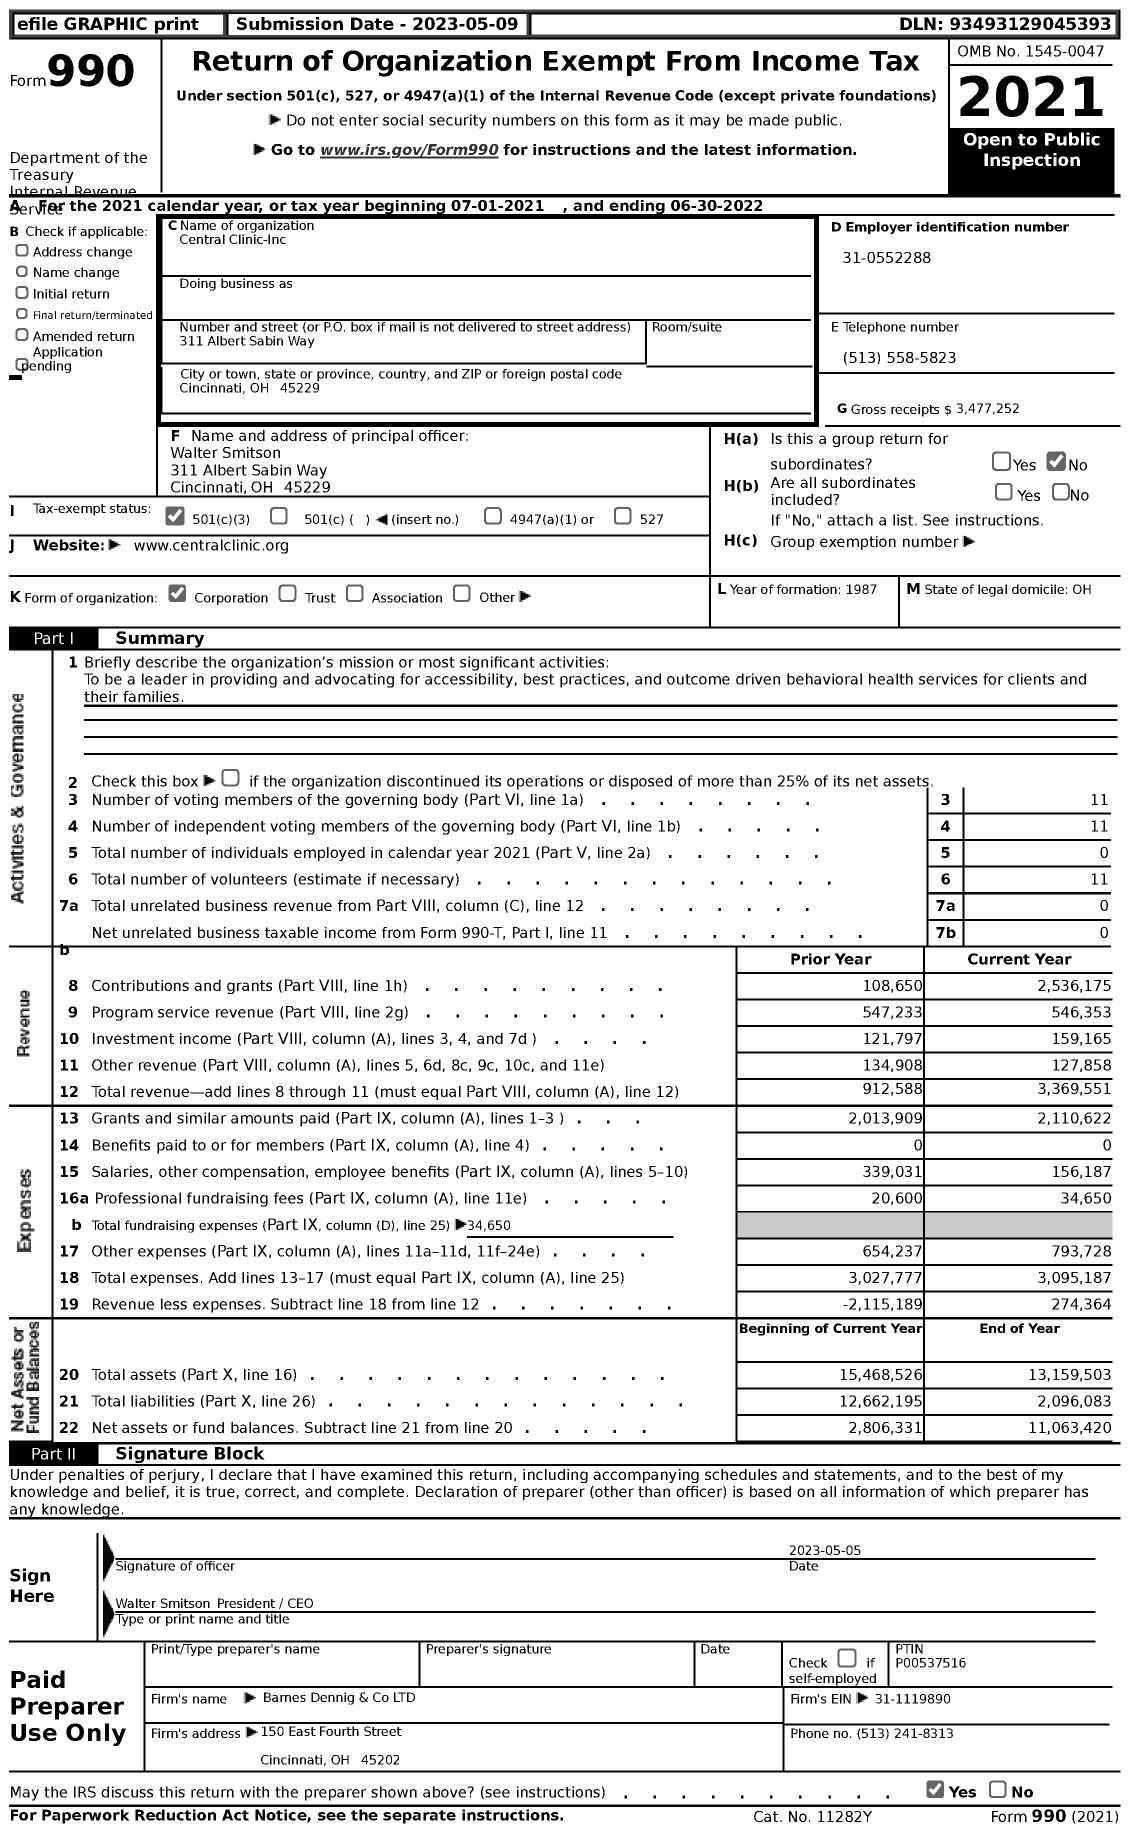 Image of first page of 2021 Form 990 for Central Clinic-Inc